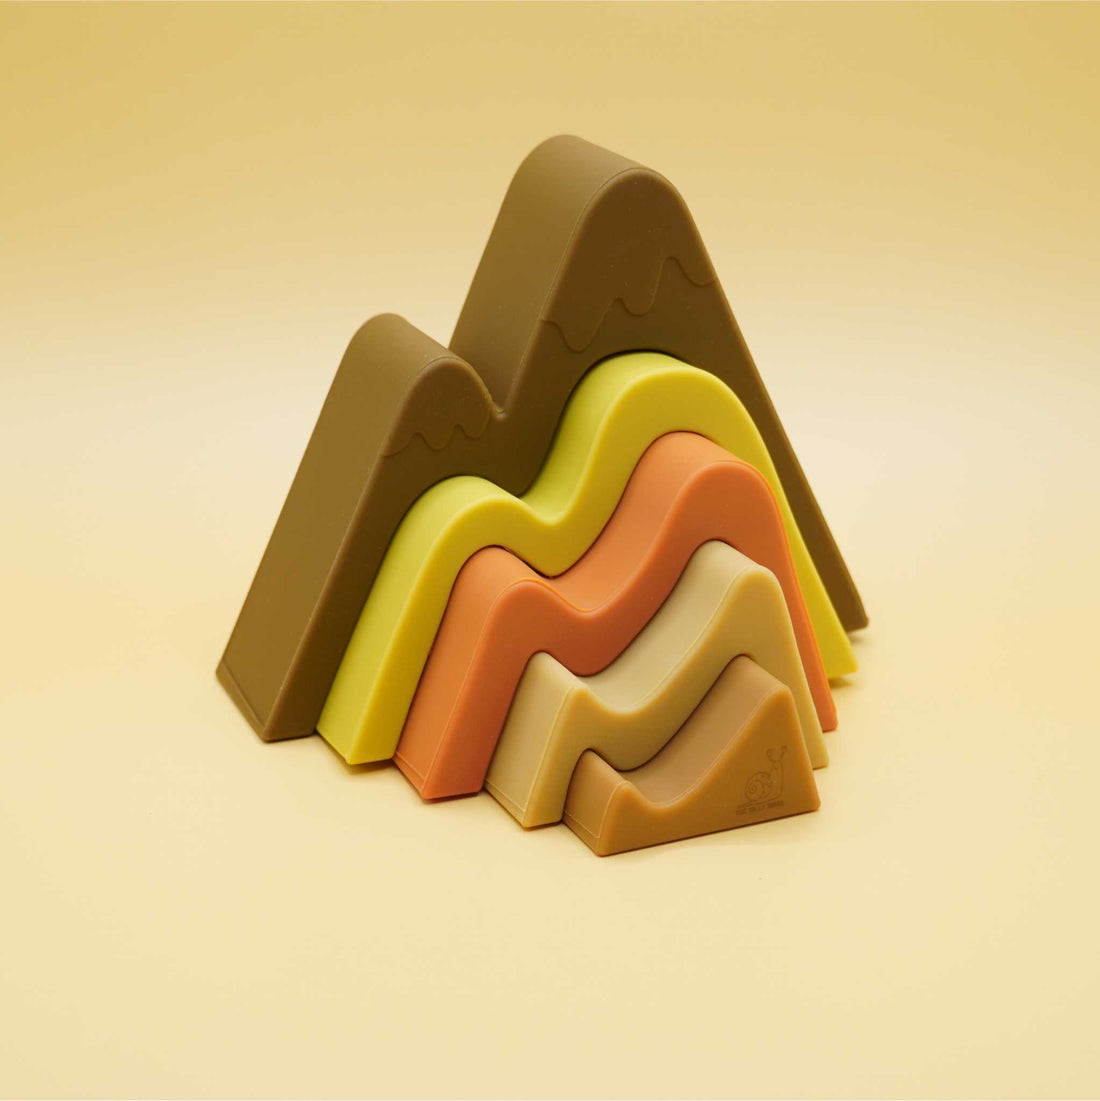 pieces spread apart of summer color mountain shaped stacking toy